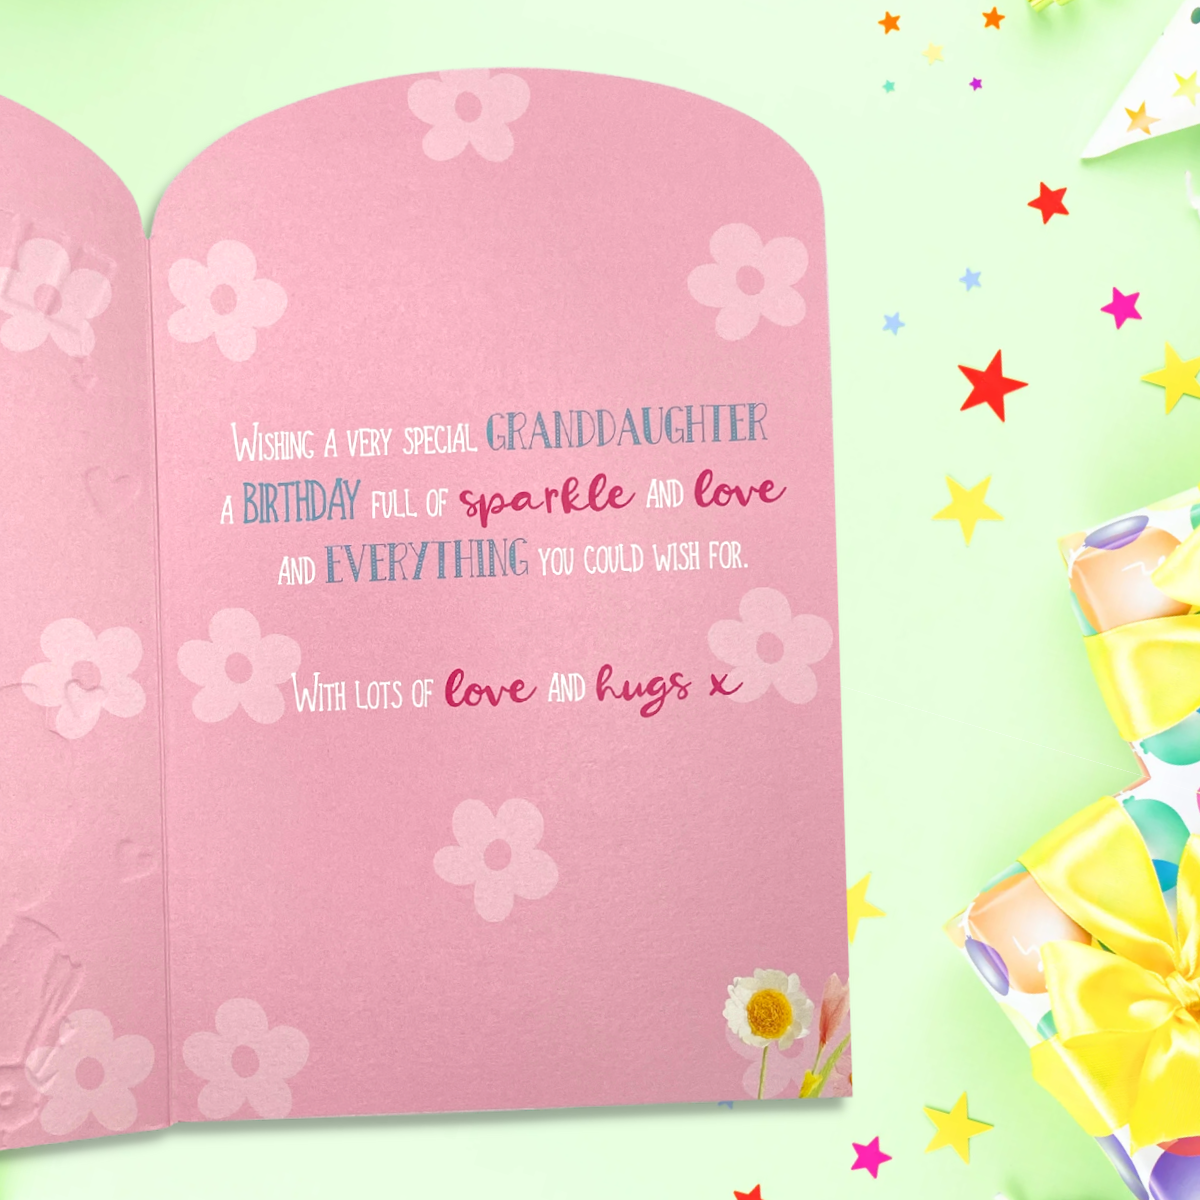 Age 2 Granddaughter Birthday Card Inside Image with verse